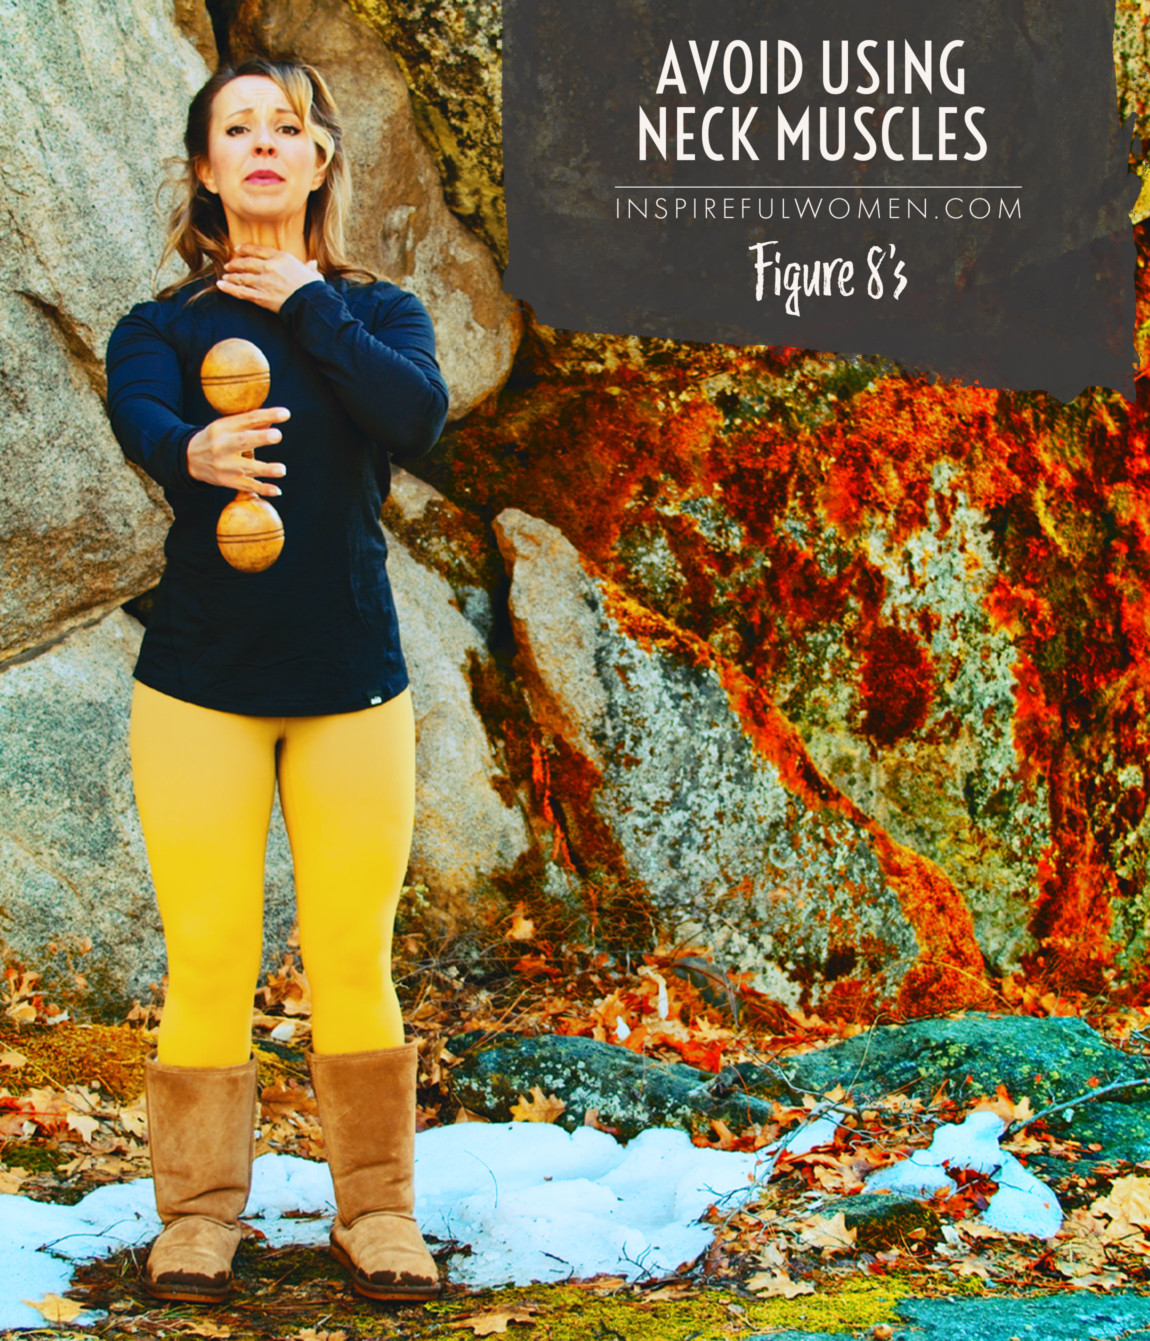 avoid-using-neck-muscles-dumbbell-figure-8-shoulder-rotator-cuff-exercise-common-mistakes